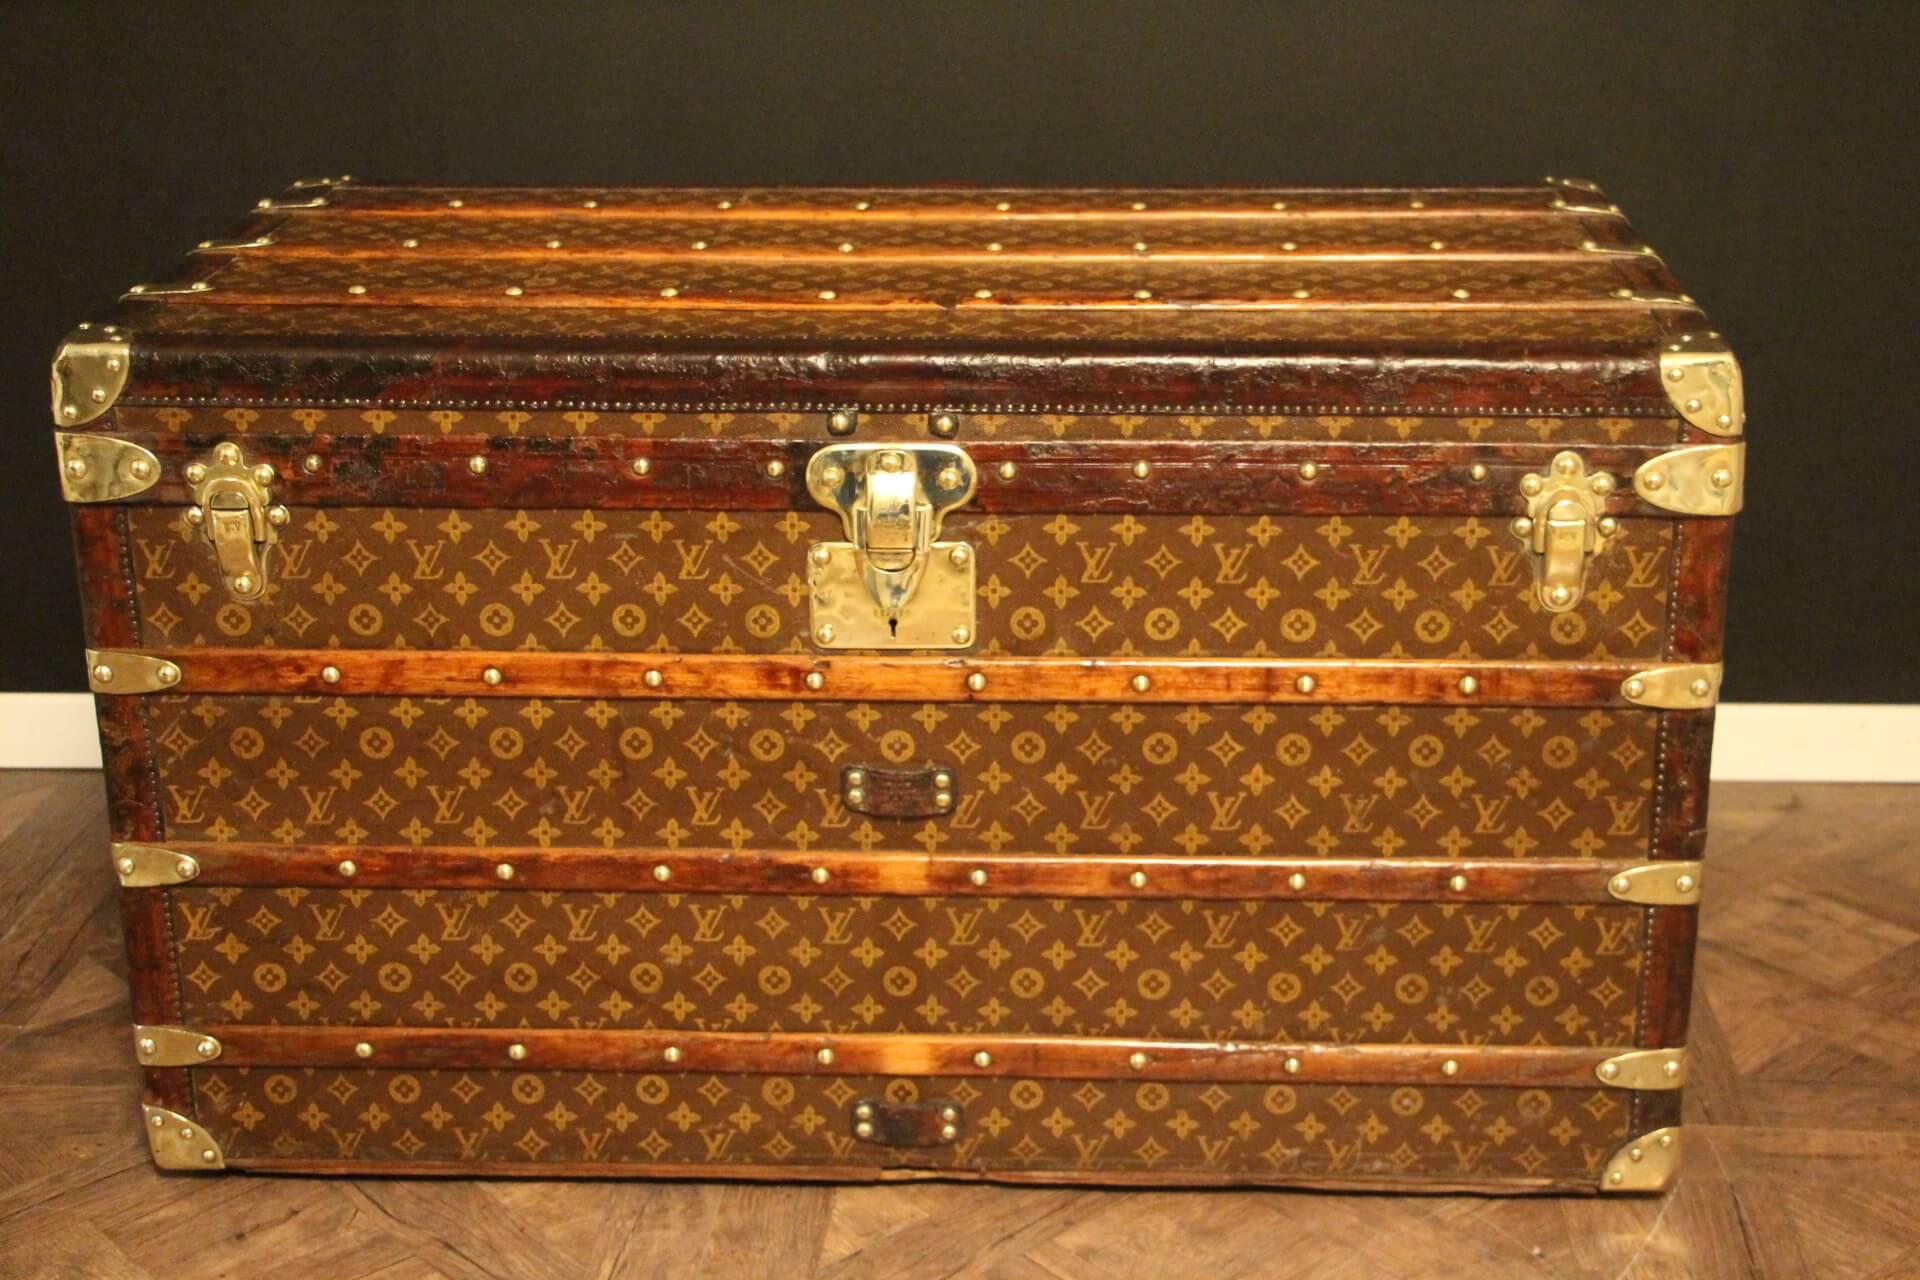 Superb Louis Vuitton steamer trunk featuring stenciled canvas, all leather trim in deep chocolate color, solid brass Louis Vuitton stamped clasps ,lock and studs, solid brass corners and solid brass LV stamped side handles.
Customized painted